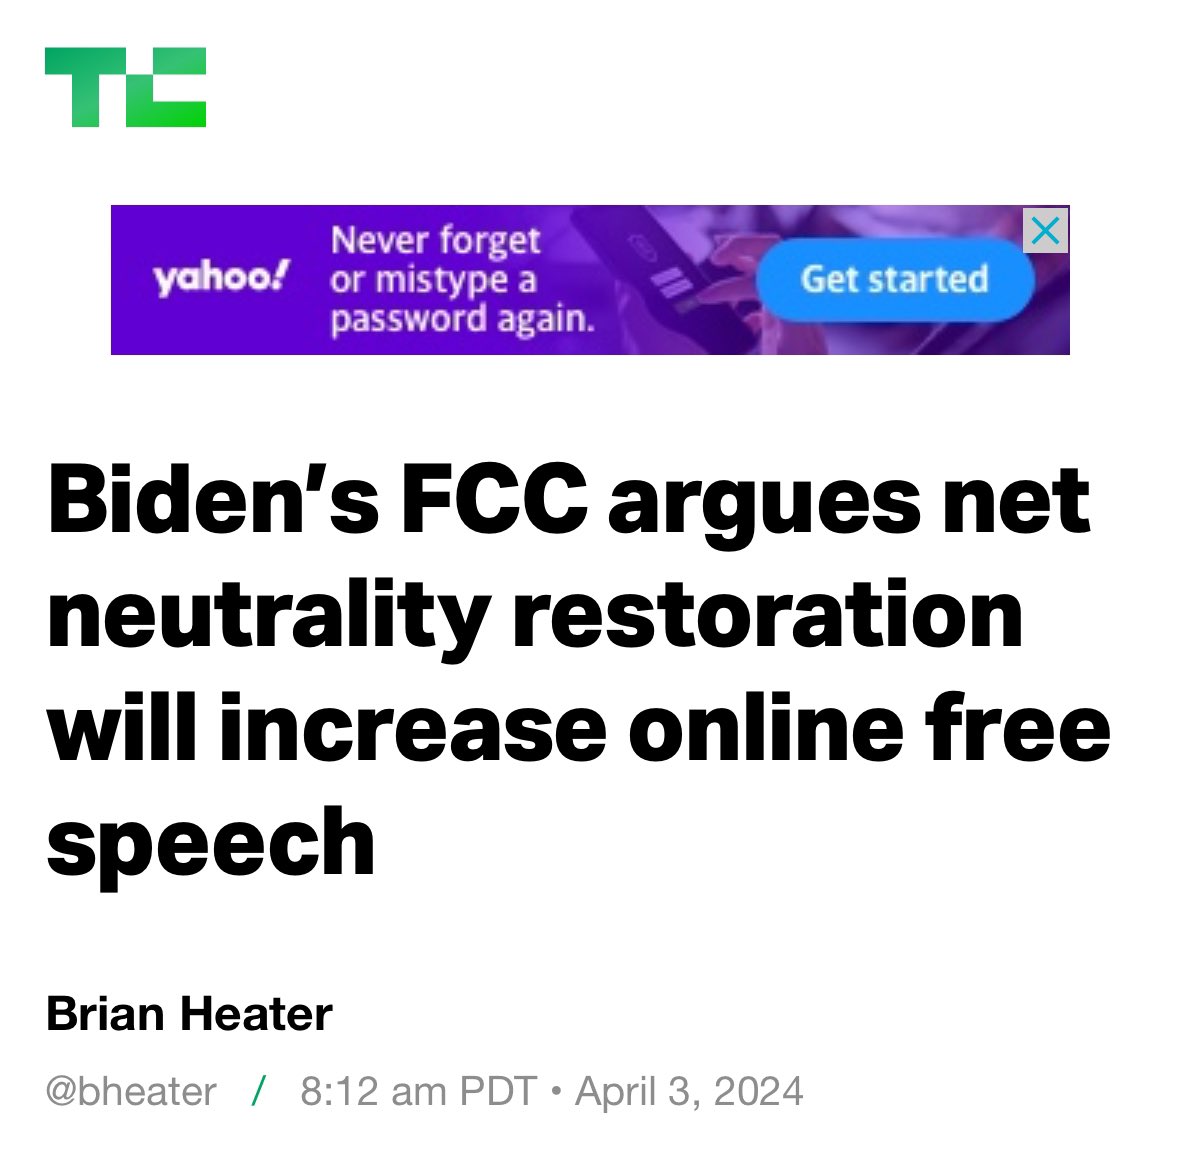 At this very moment, the Biden Administration is in the Supreme Court arguing that it has the right to continue pressuring social media companies into censoring free speech. Yet we’re supposed to believe that it will use these sweeping new government powers to protect it?